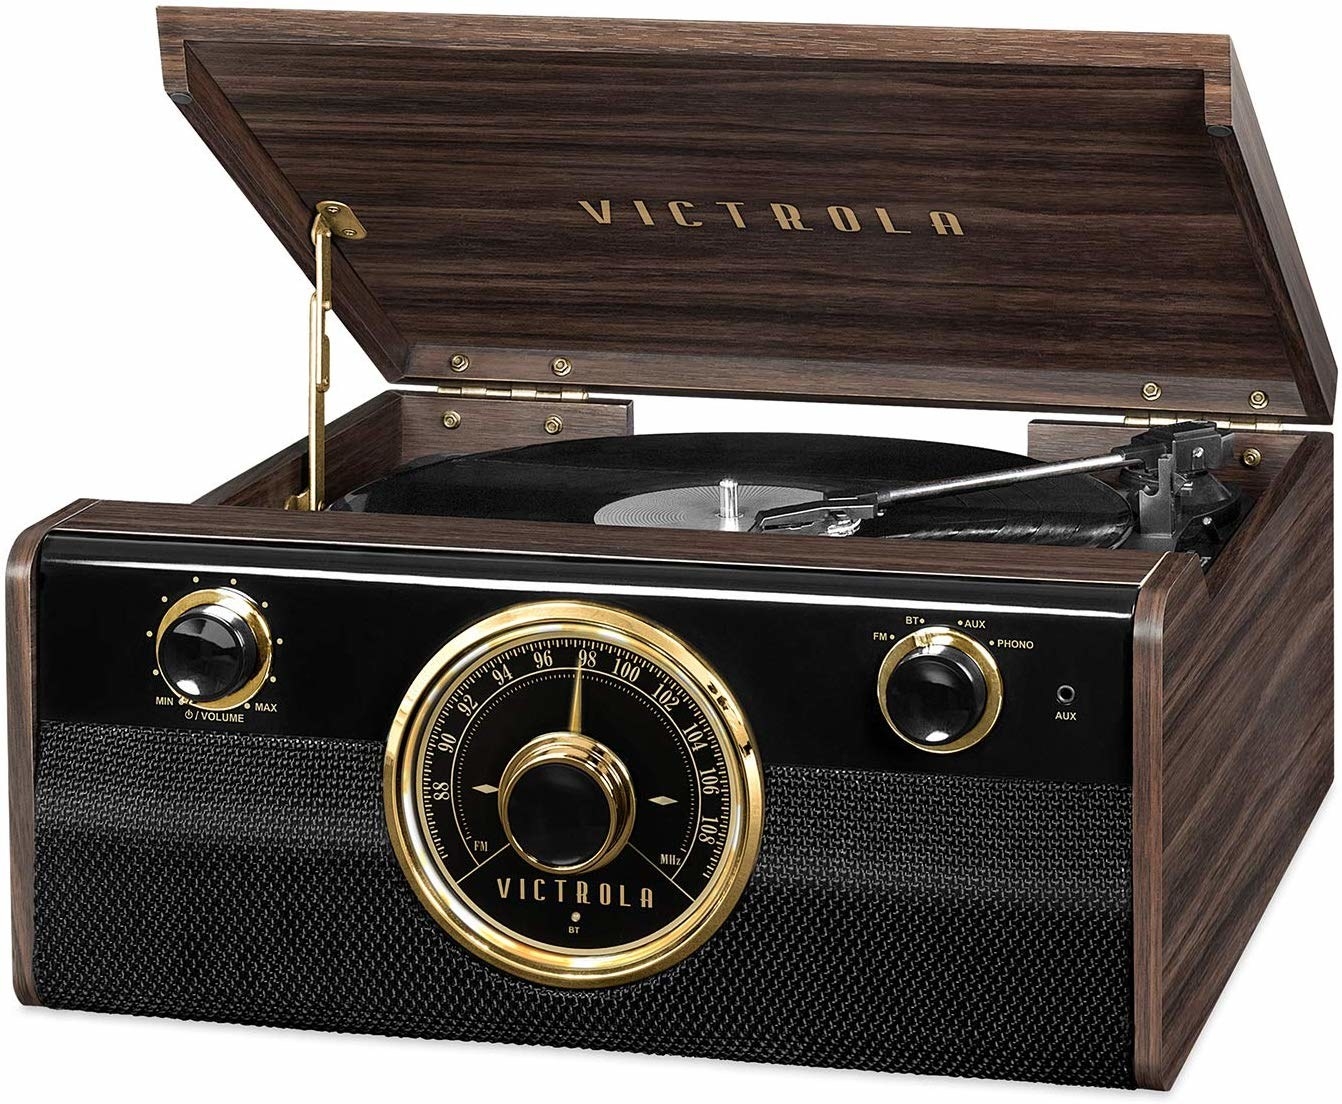 the dark brown record player with gold accents